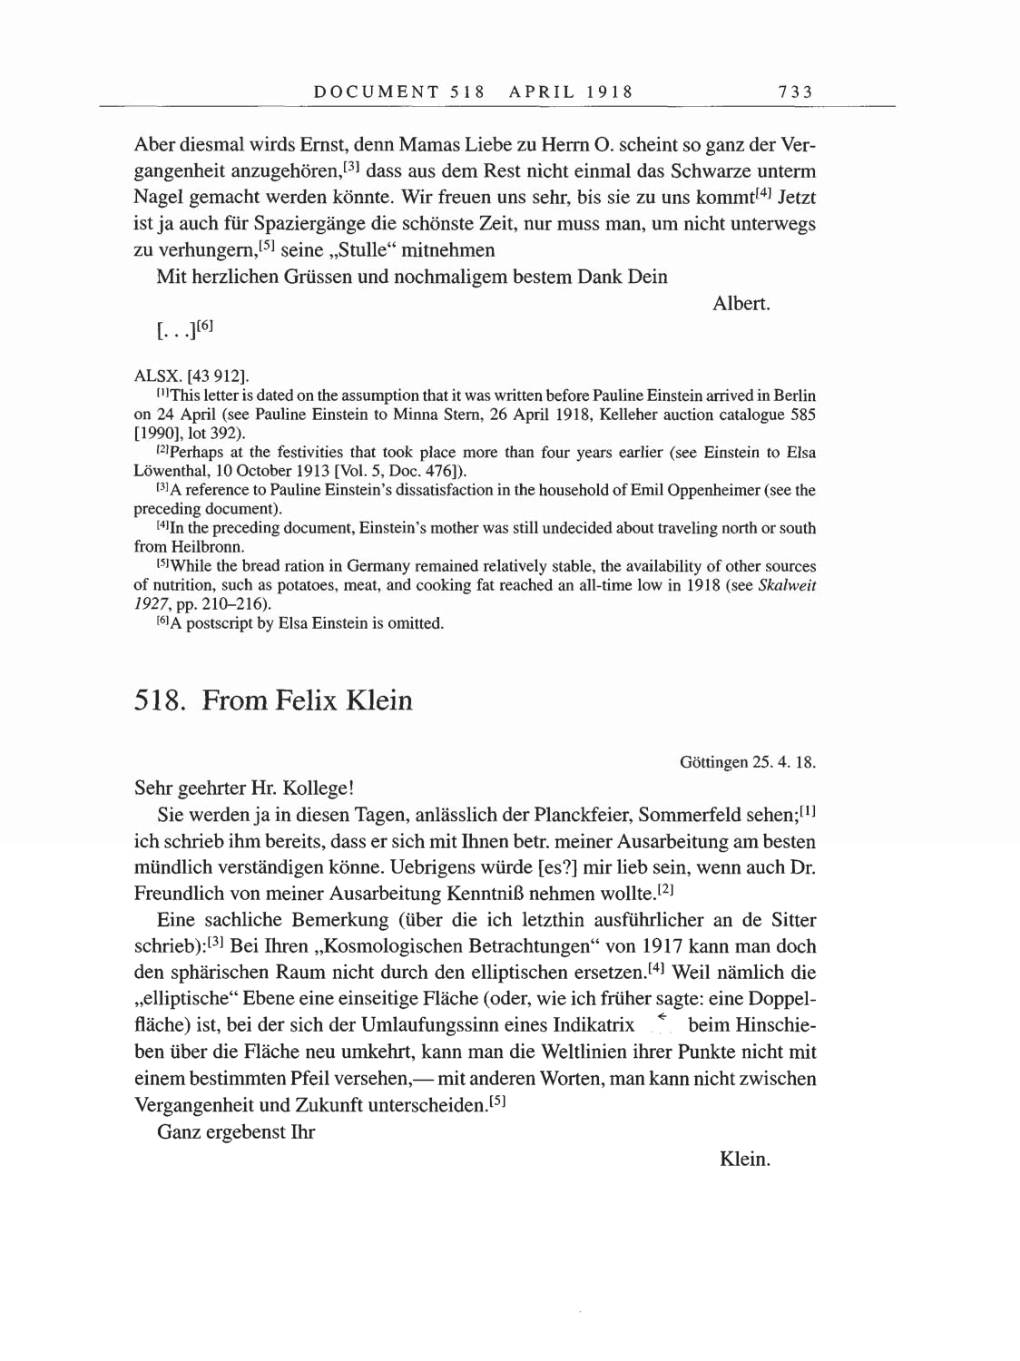 Volume 8, Part B: The Berlin Years: Correspondence 1918 page 733